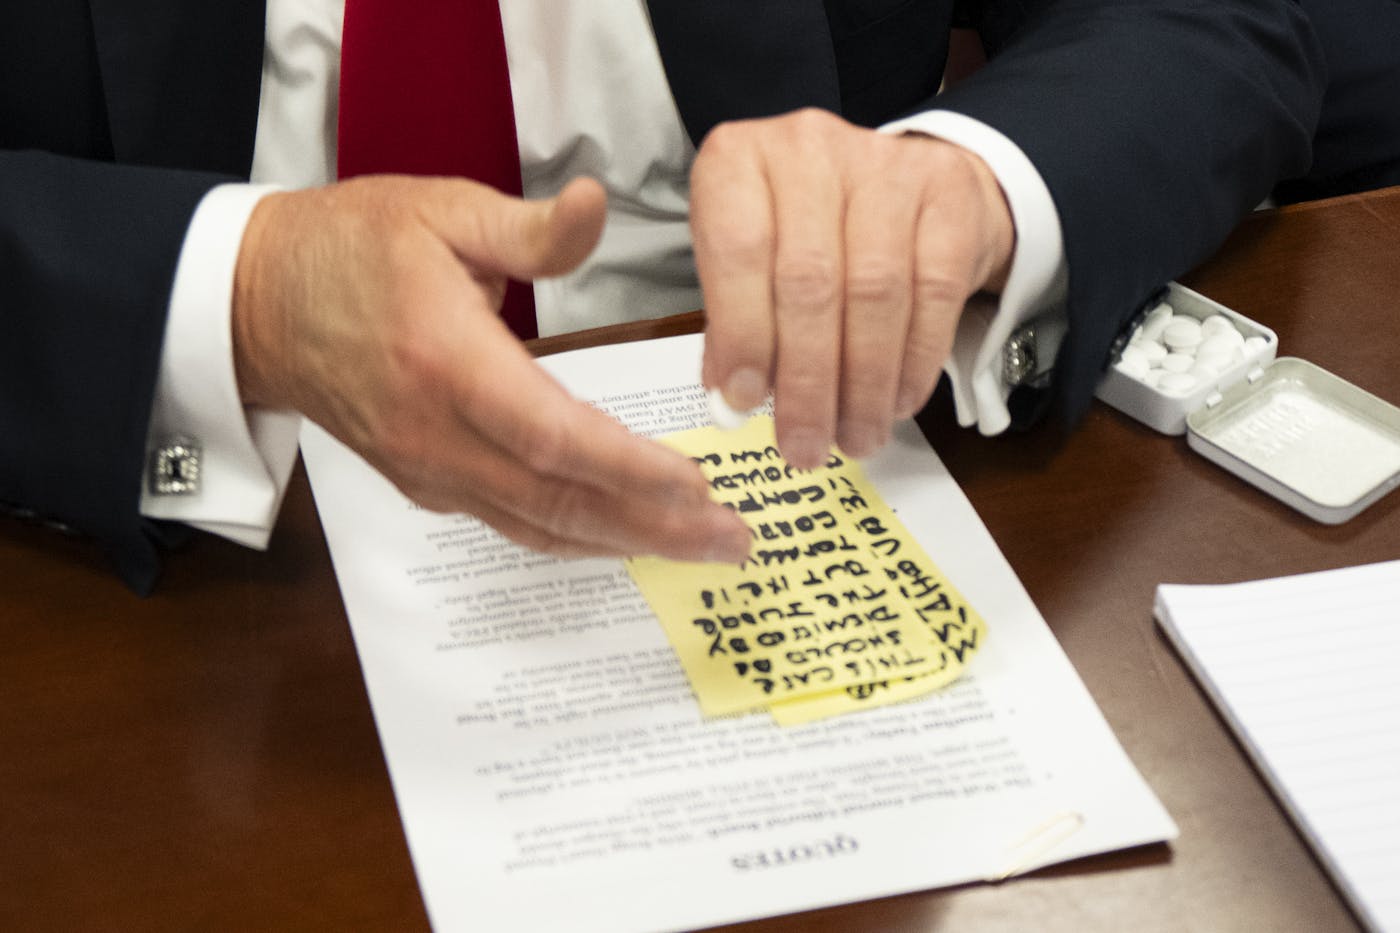 Closeup of Donald Trump's hands hovering above the sticky note